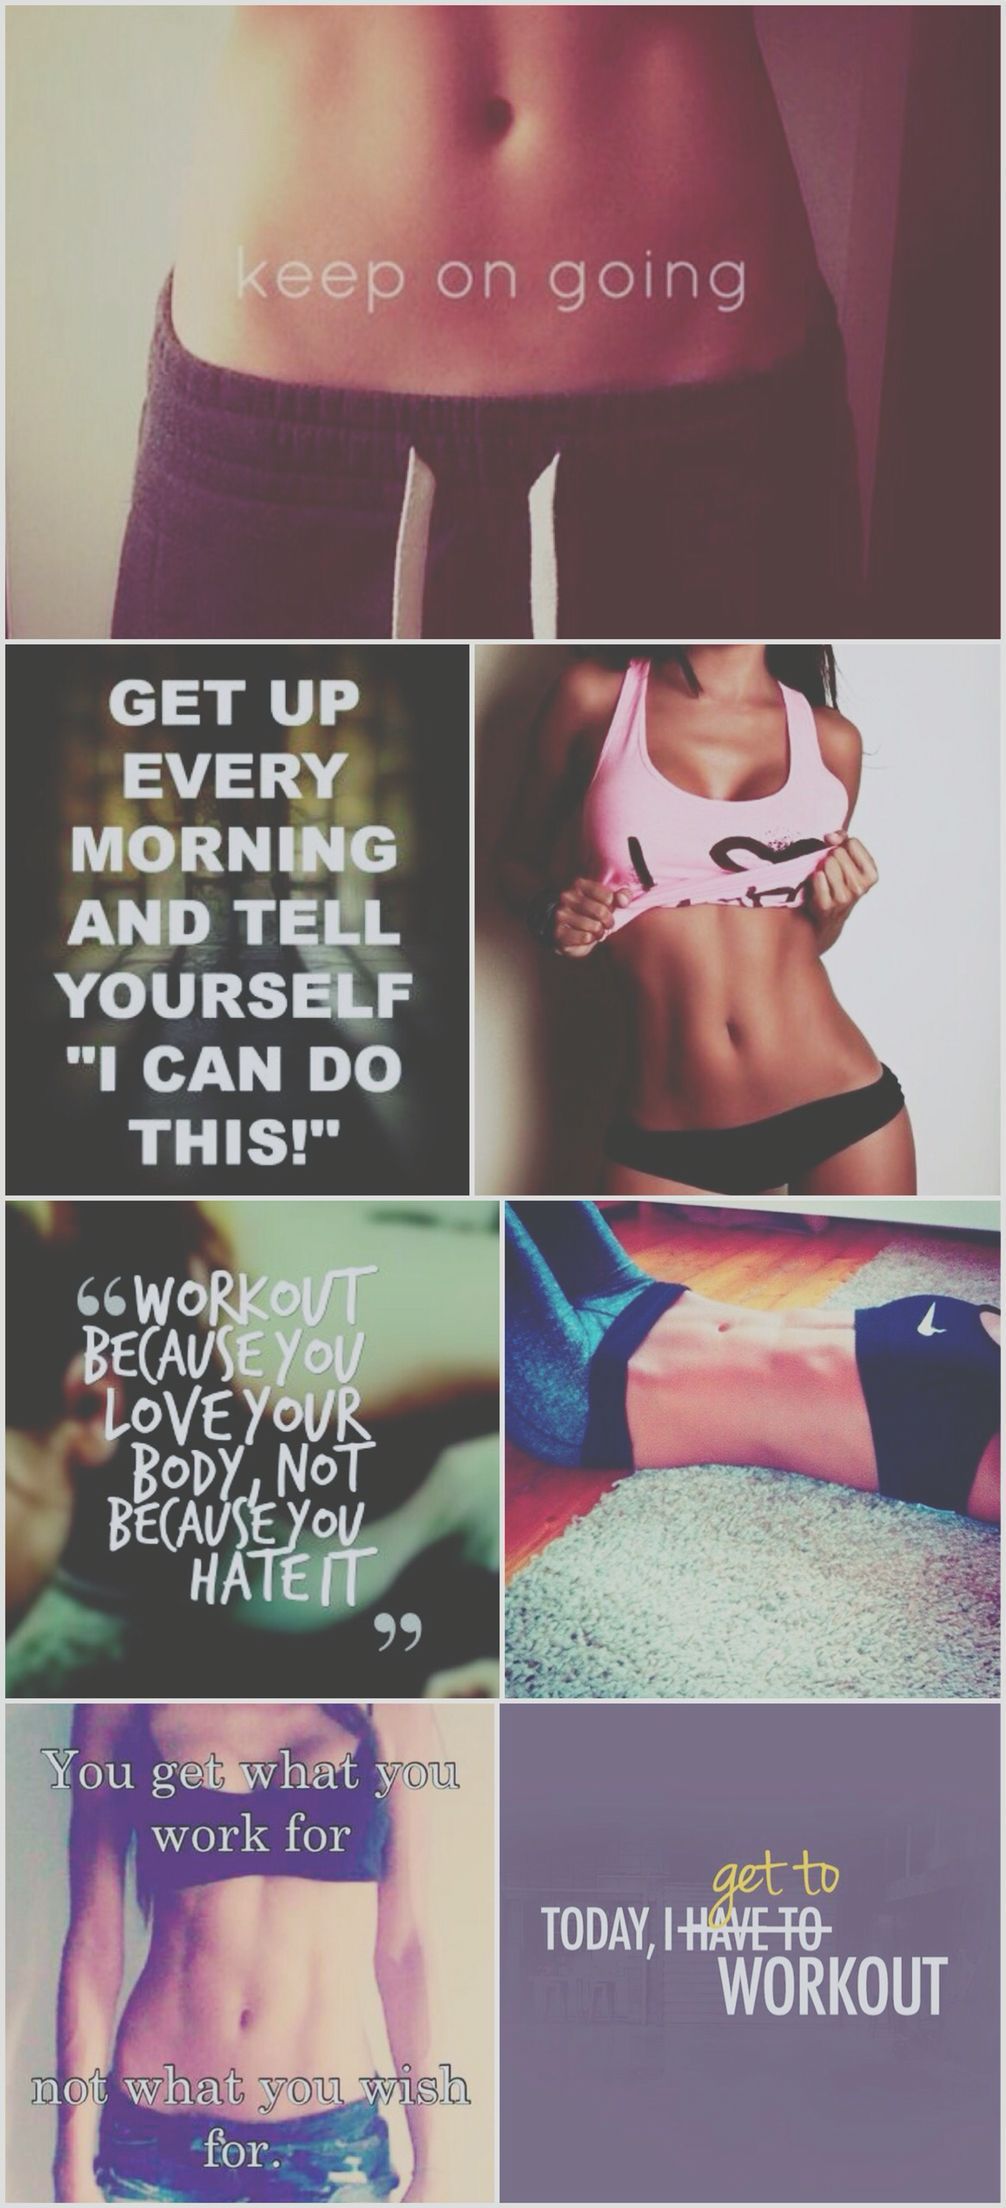 Fitness motivational wallpaper, background, iPhone, android, diet, weight loss, thinspiration, inspiration, motivation, diet, exercise -   19 diet motivation iphone
 ideas